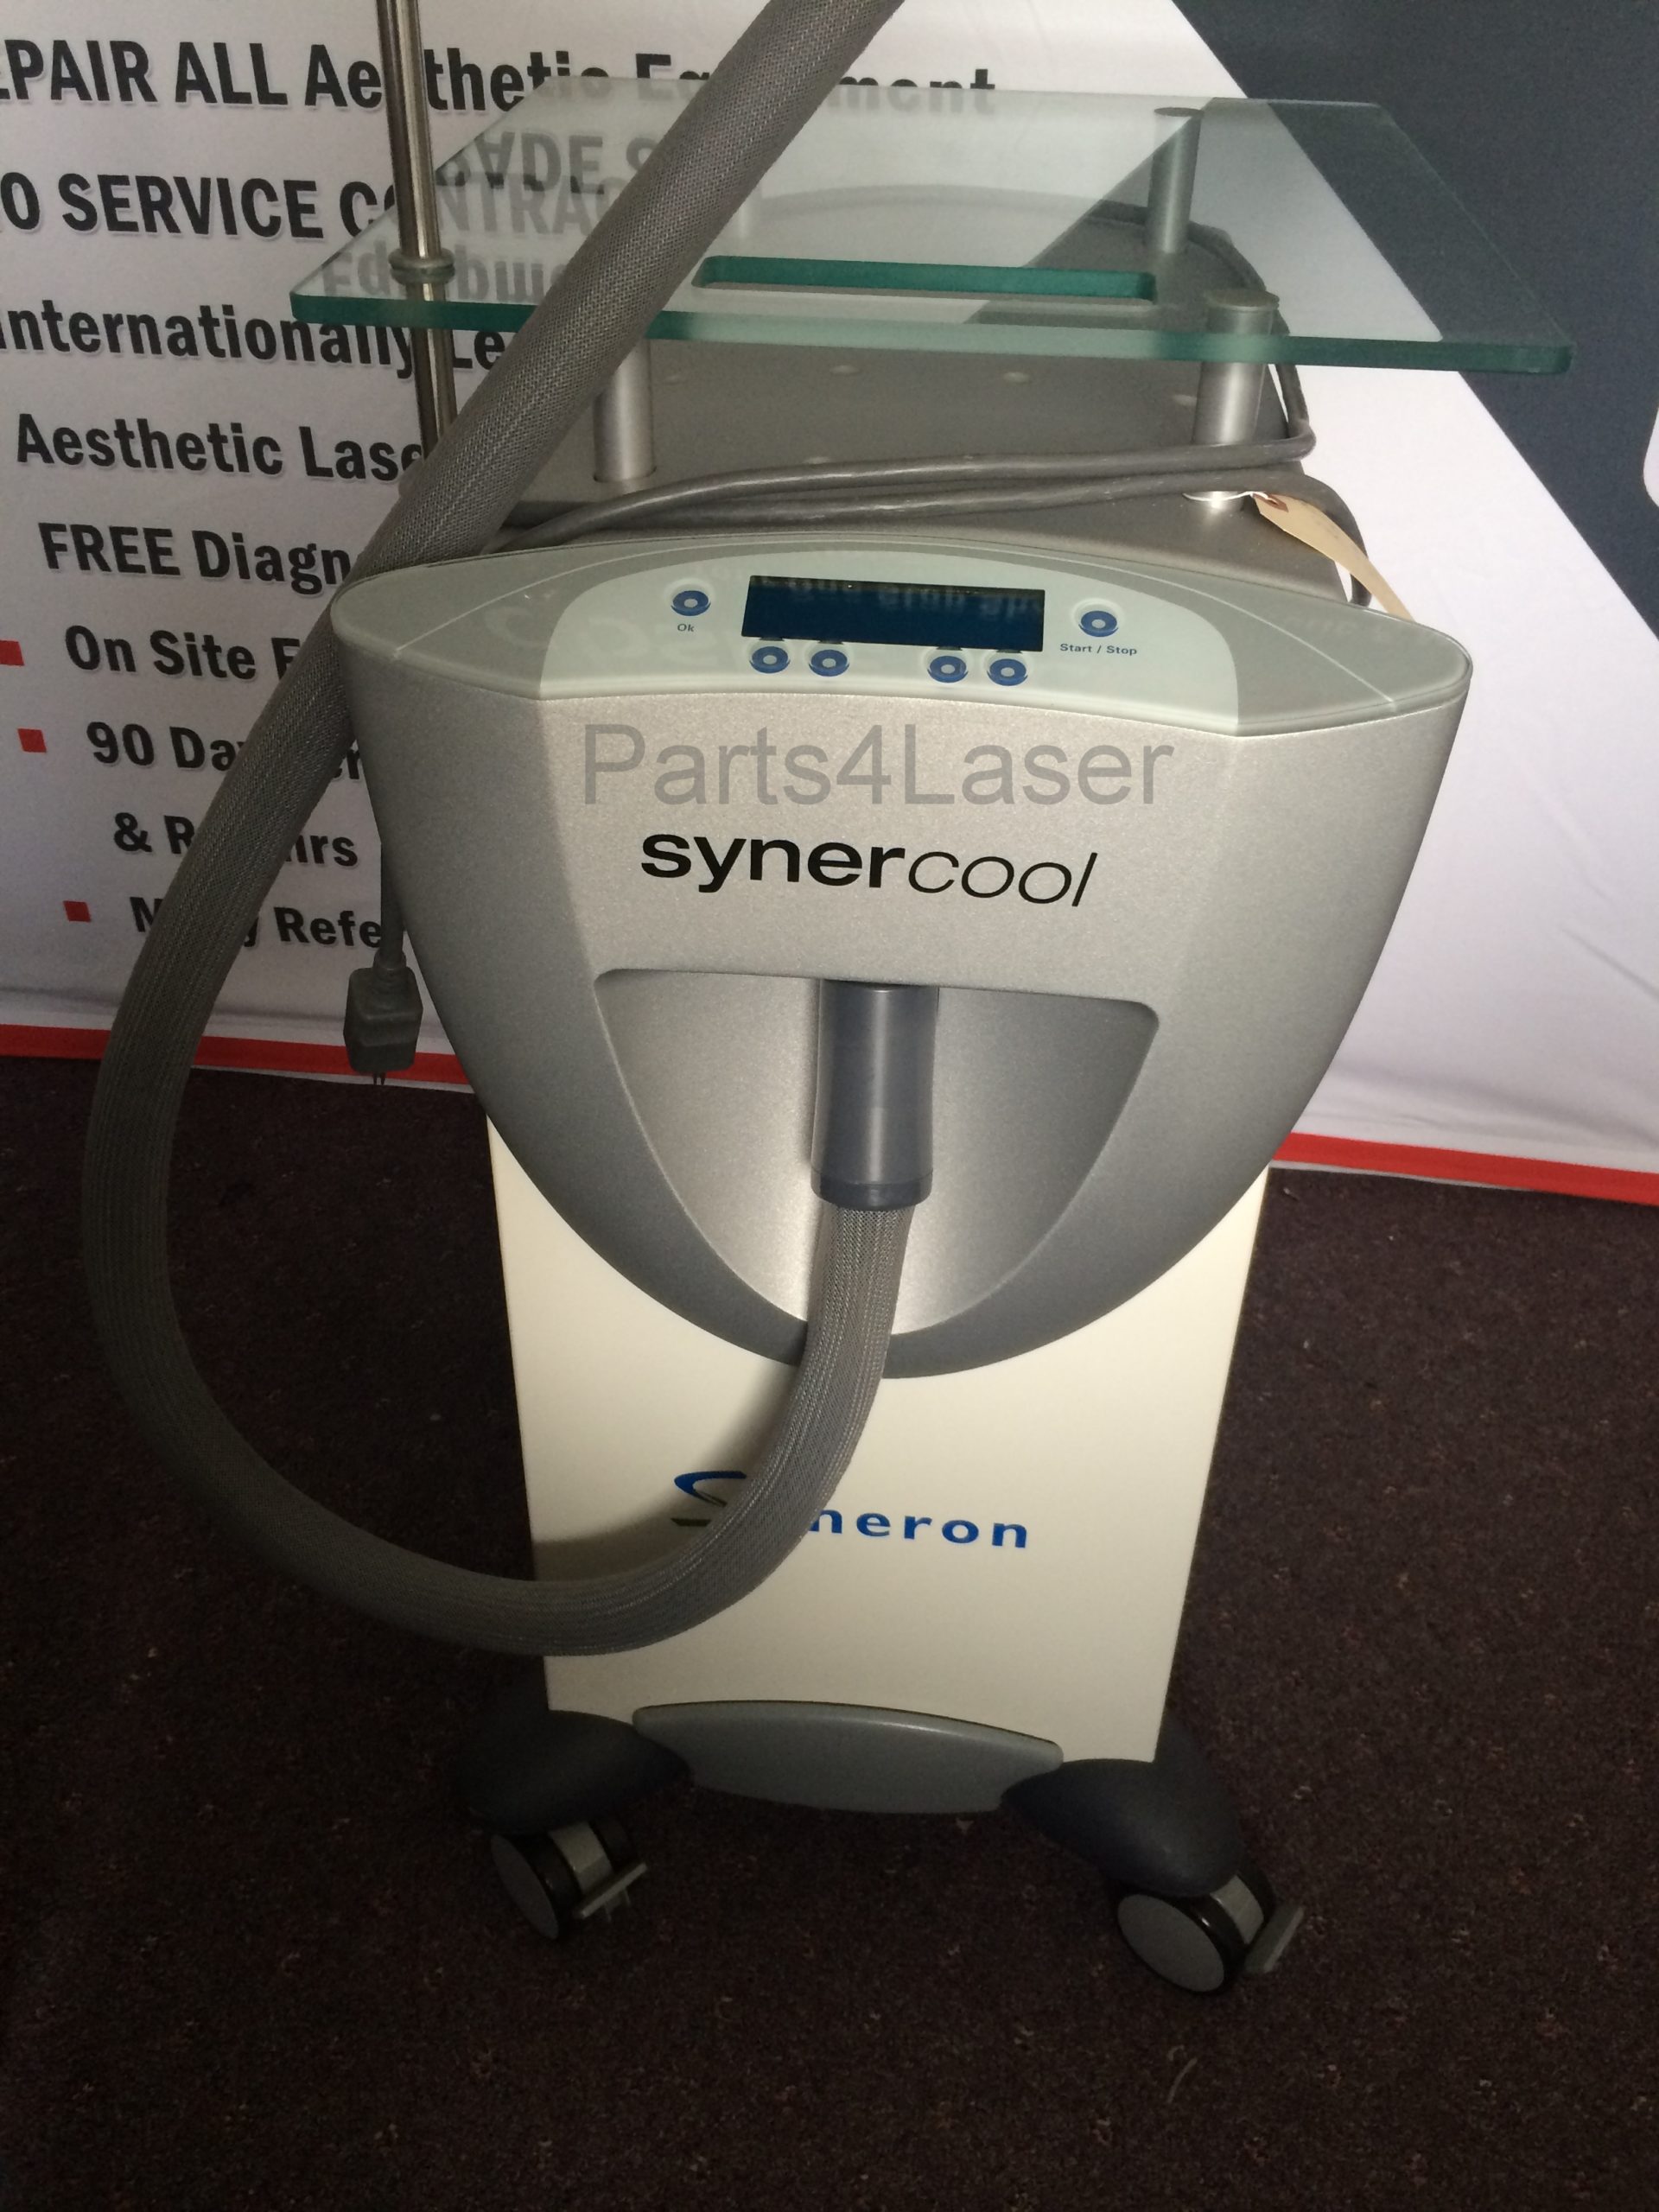 Zimmer Cryo 5 — Laser Resellers